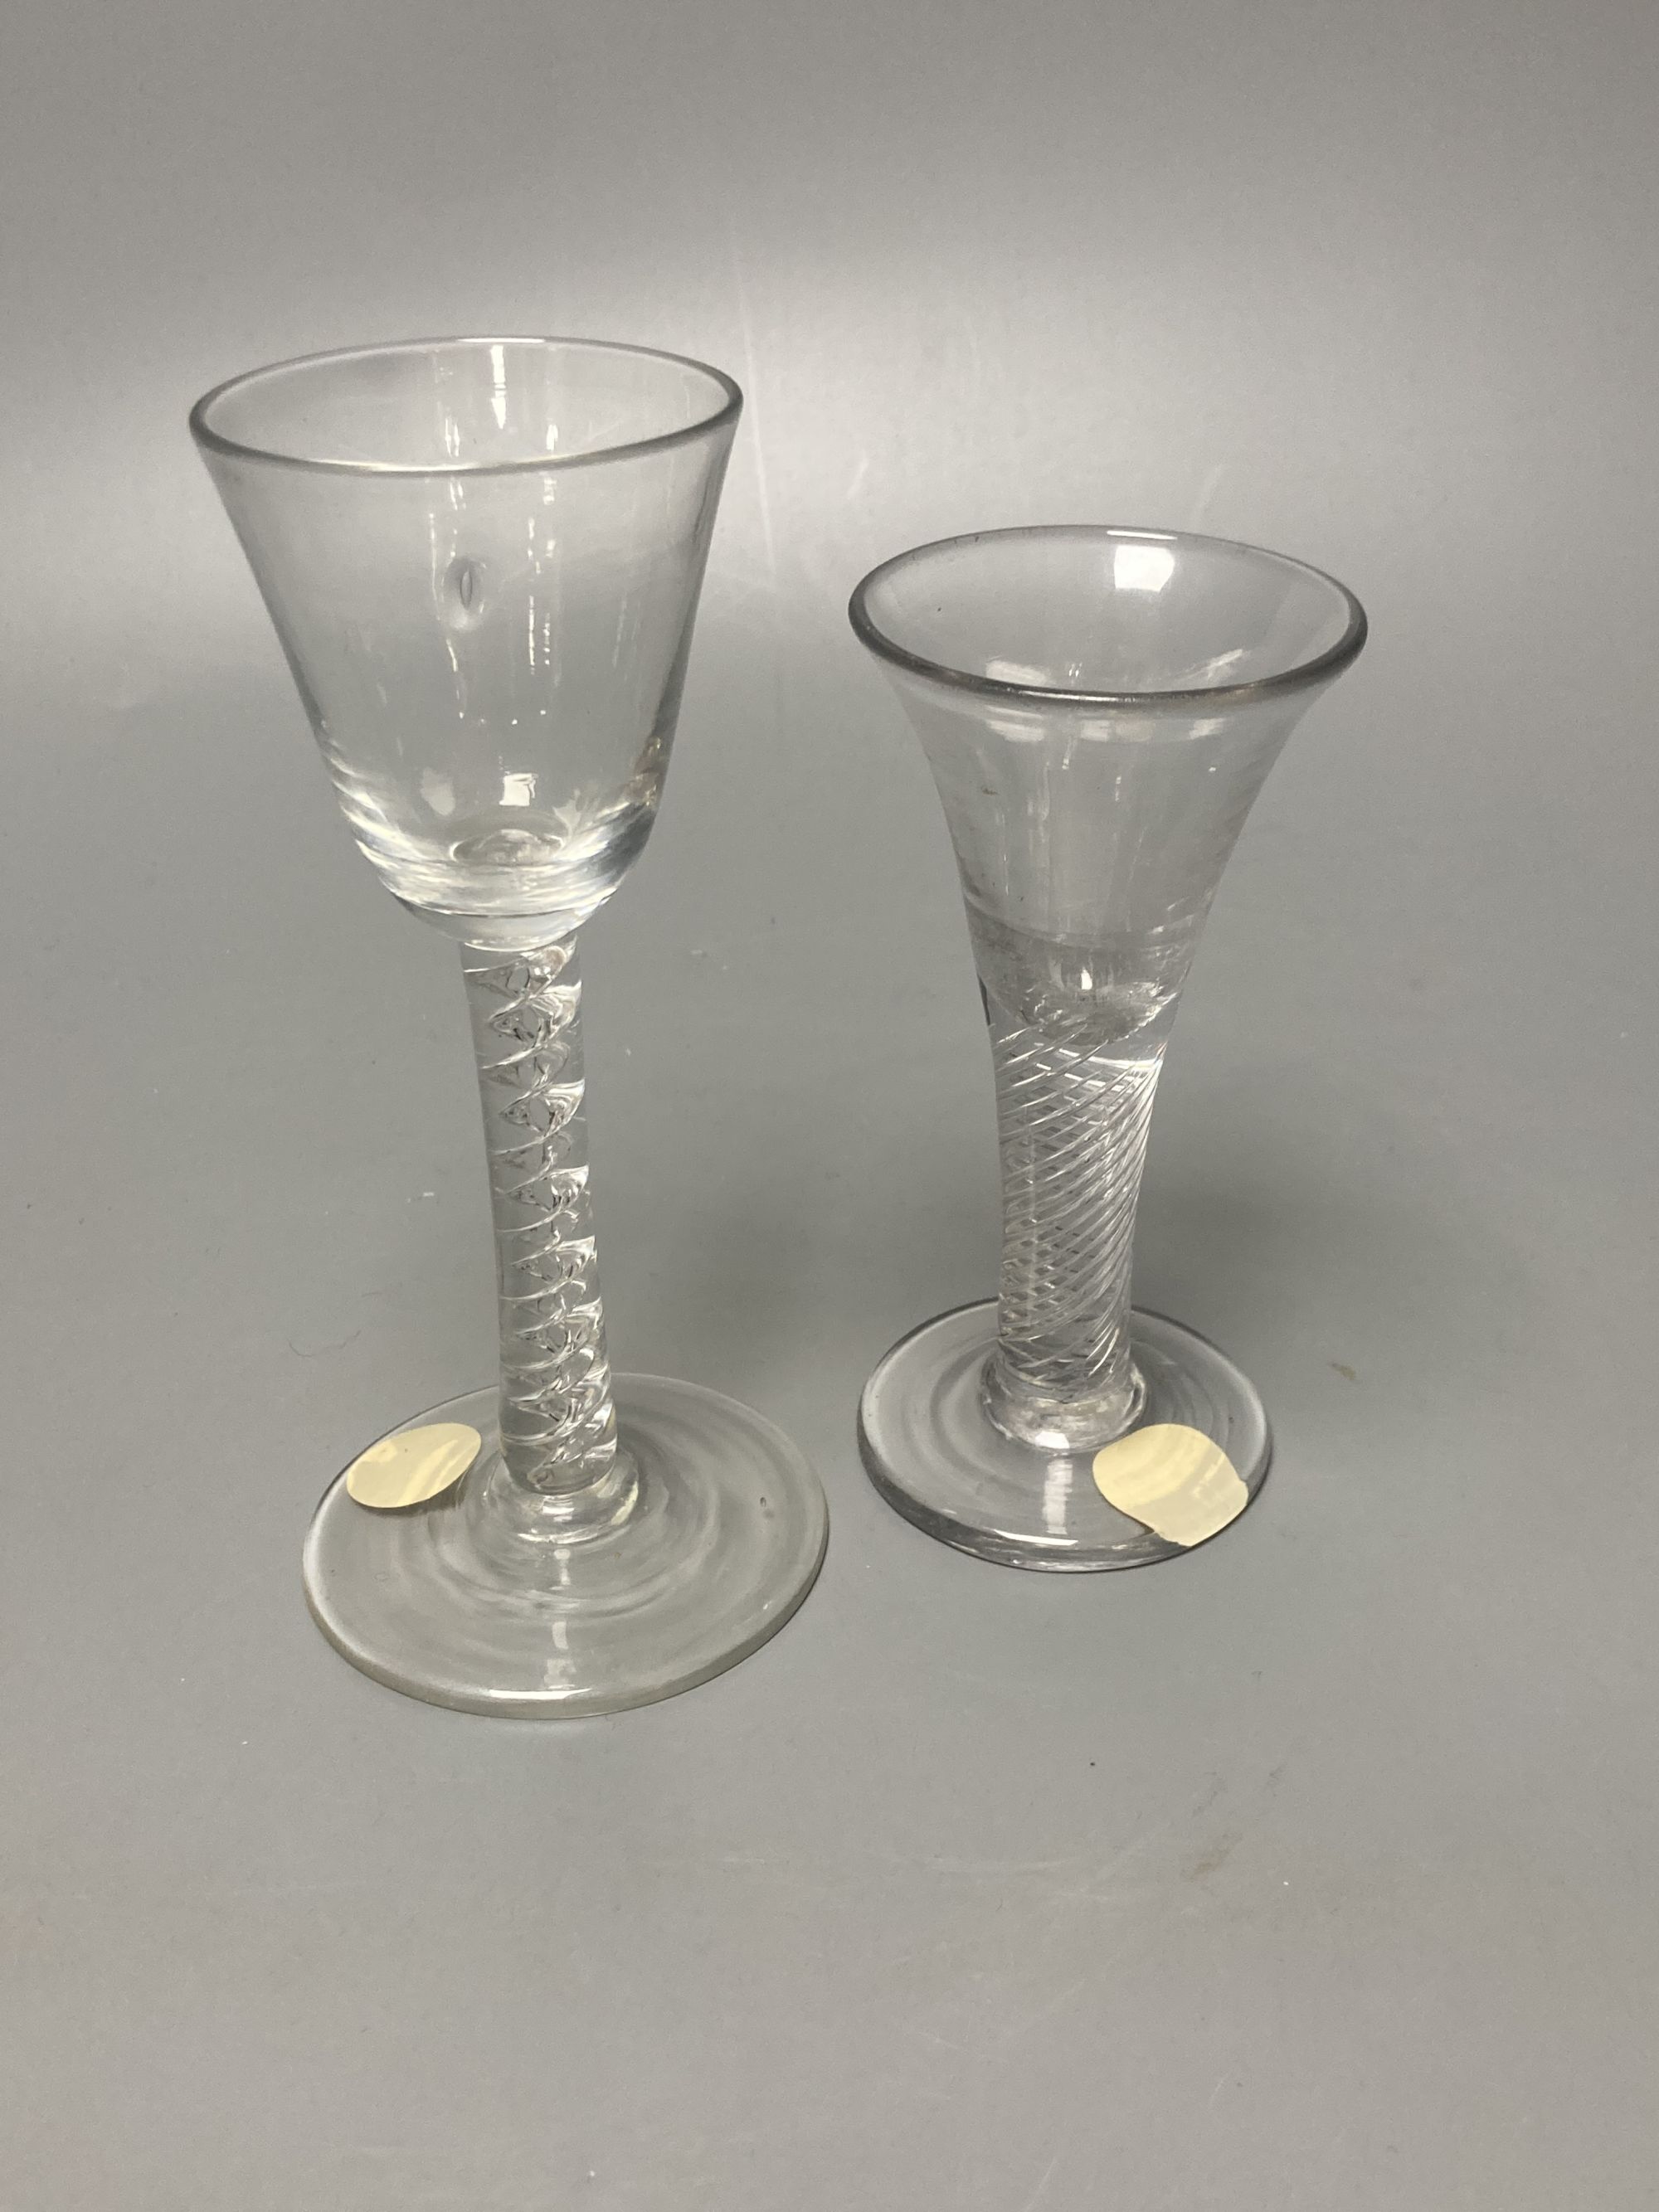 Two George II mercurial air twist stem cordial glasses, c.1750-5, with funnel and drawn trumpet bowls, 15.1cm and 12.4cm